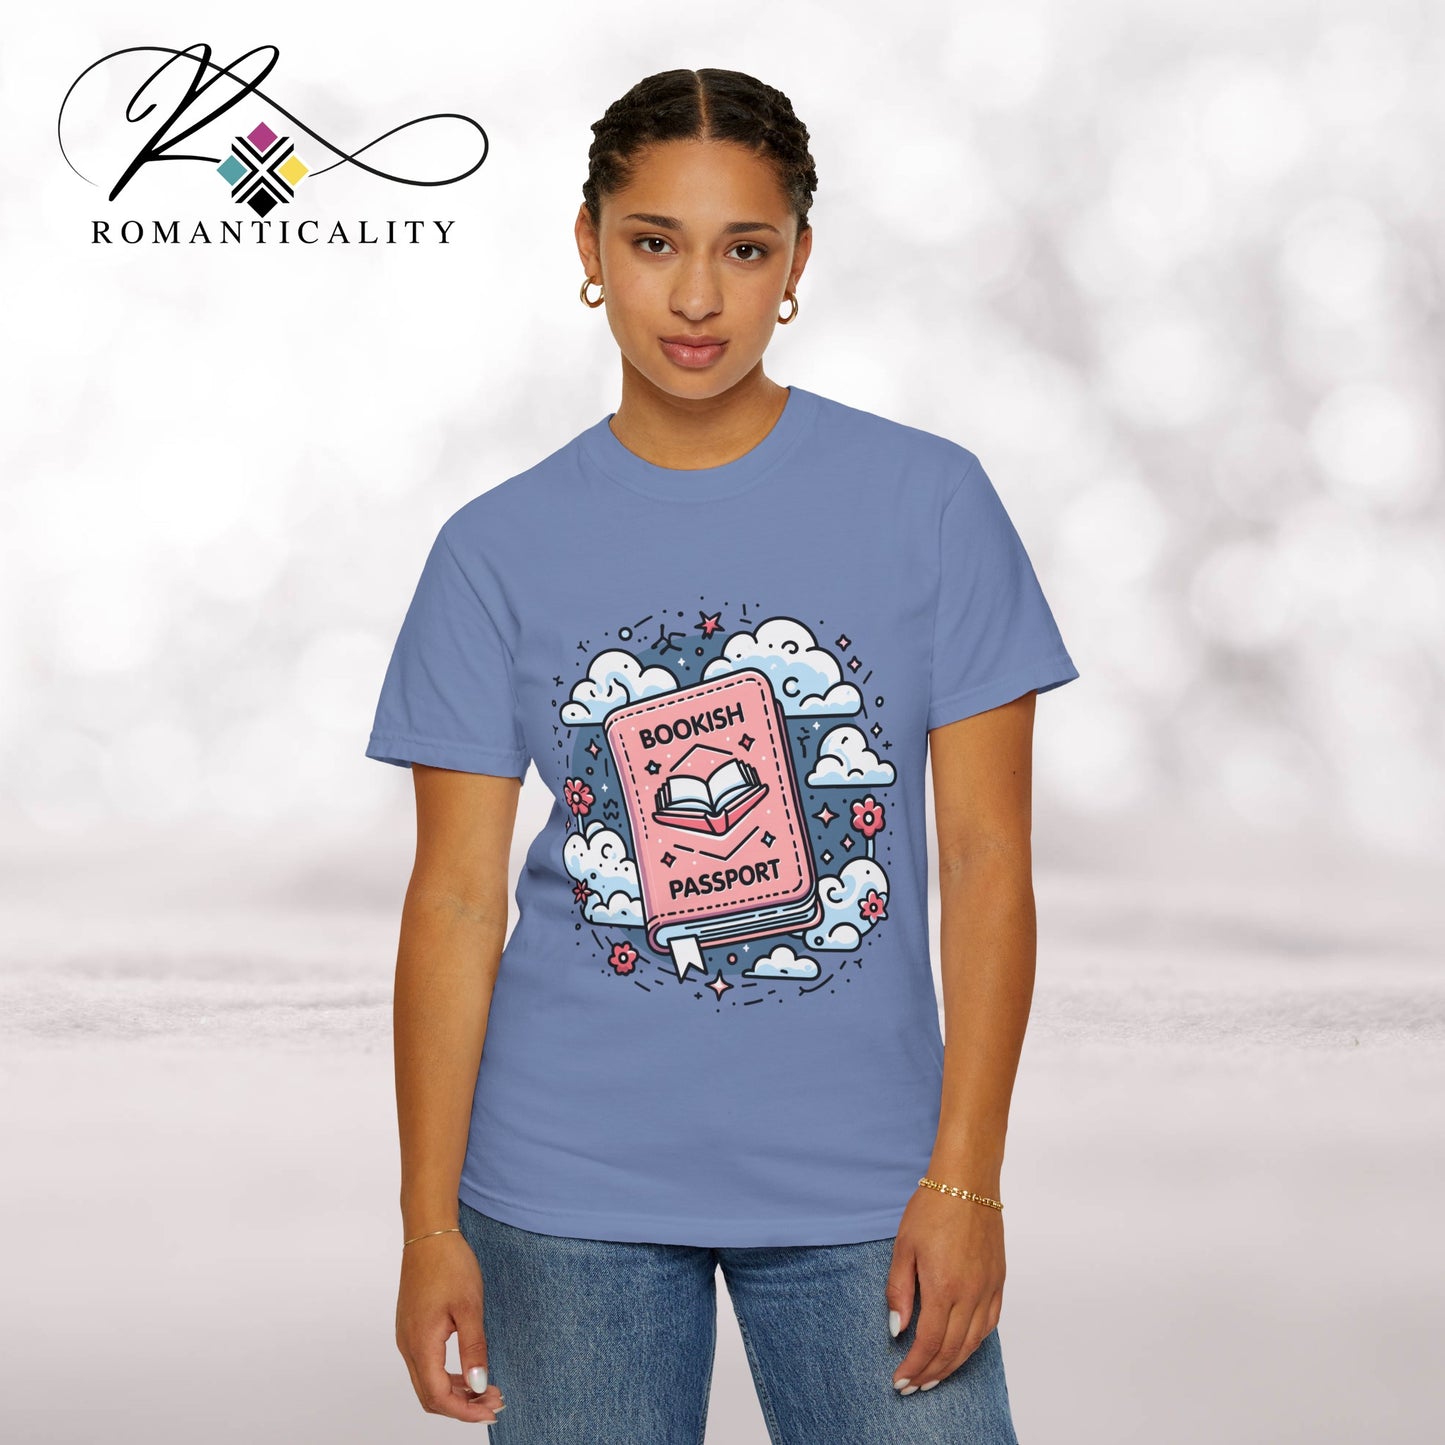 Bookish Graphic Tee-Book Passport to Ride-Comfortable Book Lover T-Shirt-Gift for Readers/Writers